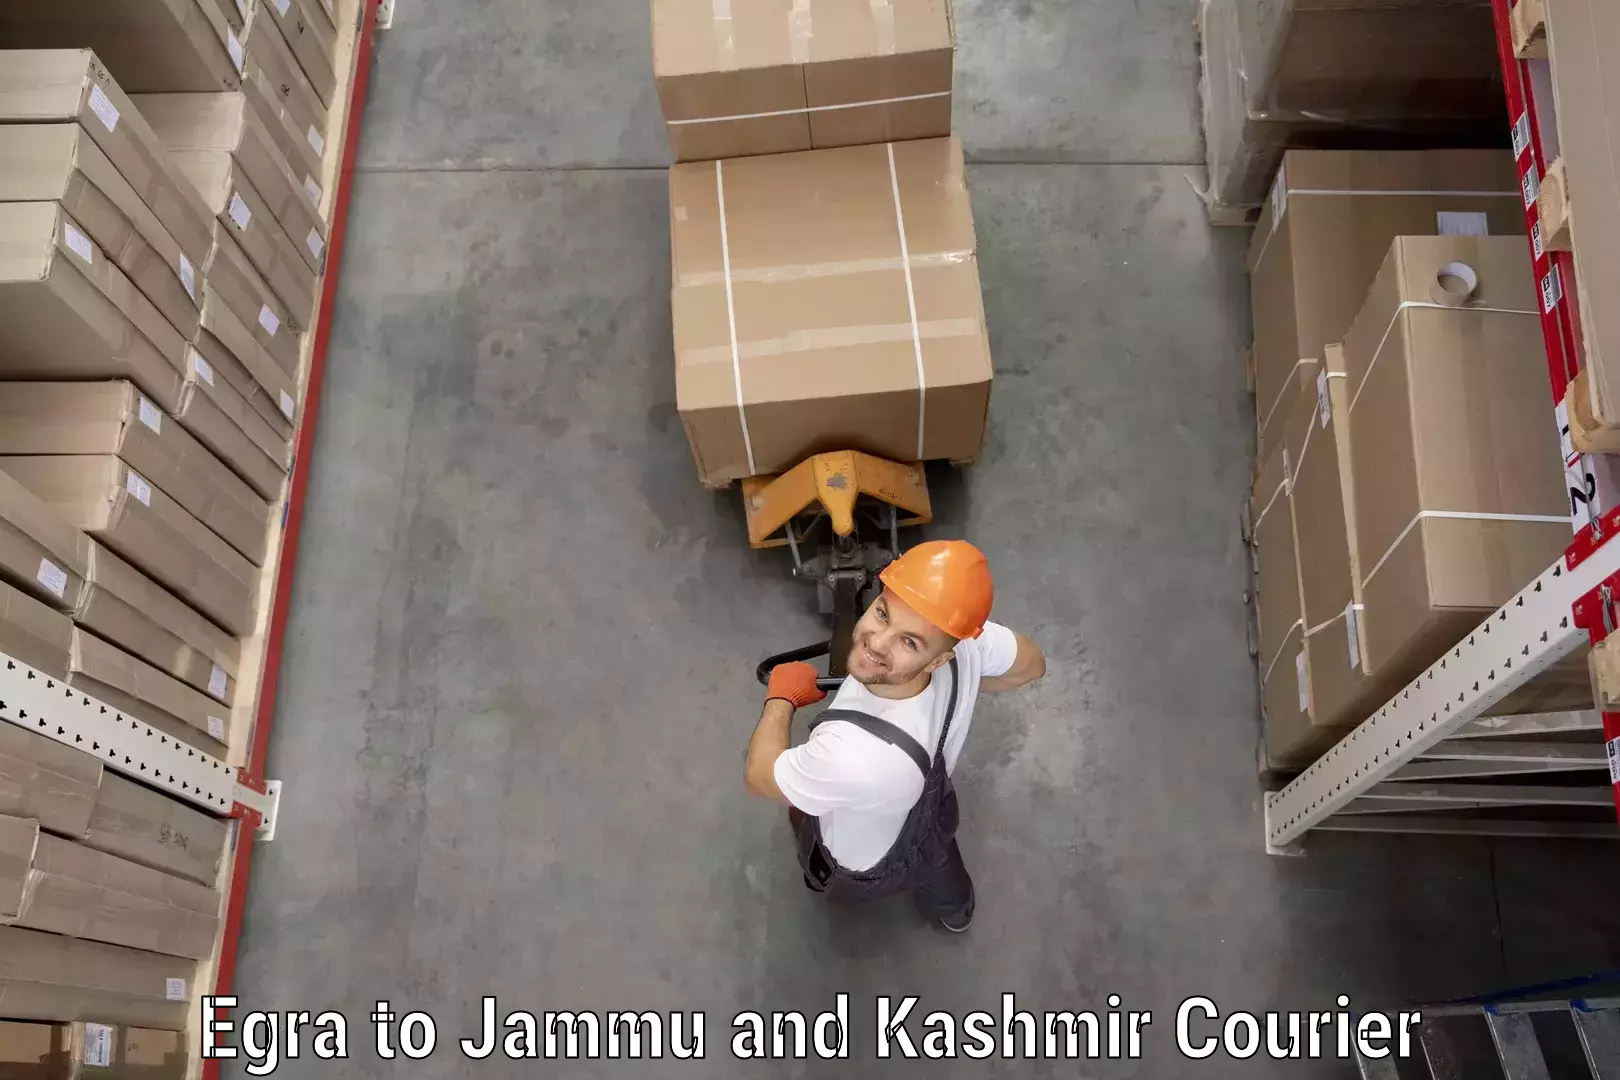 Efficient courier operations Egra to Jammu and Kashmir